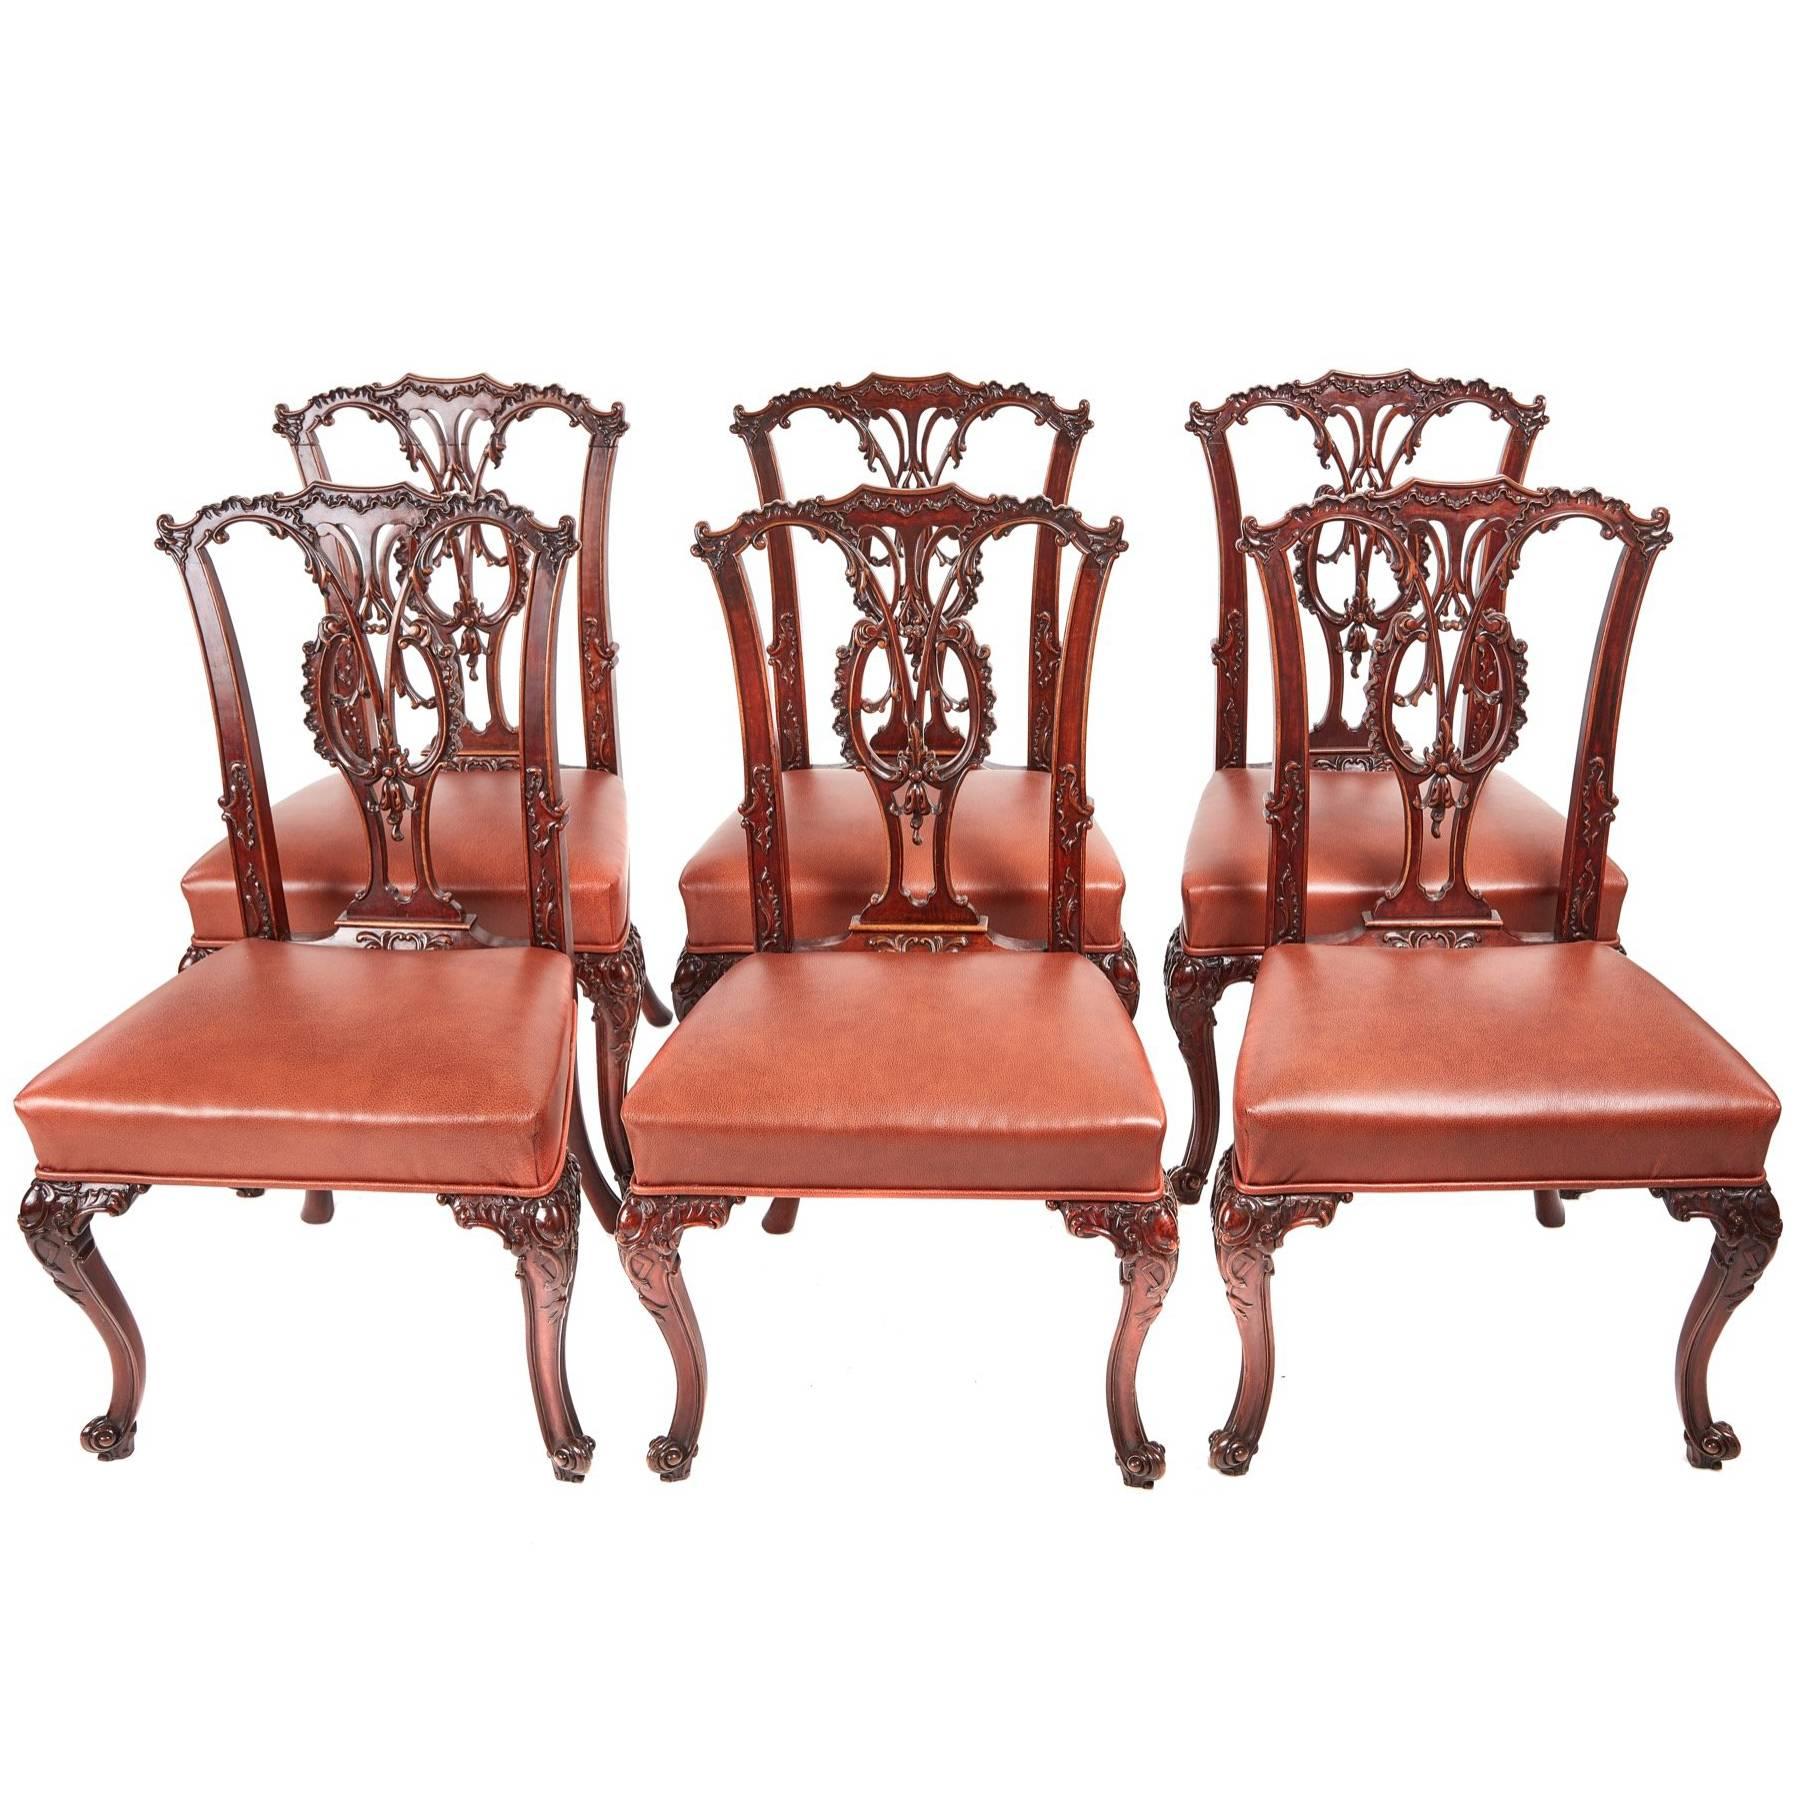 Fine Quality of Six Carved Mahogany Chippendale Style Dining Chairs